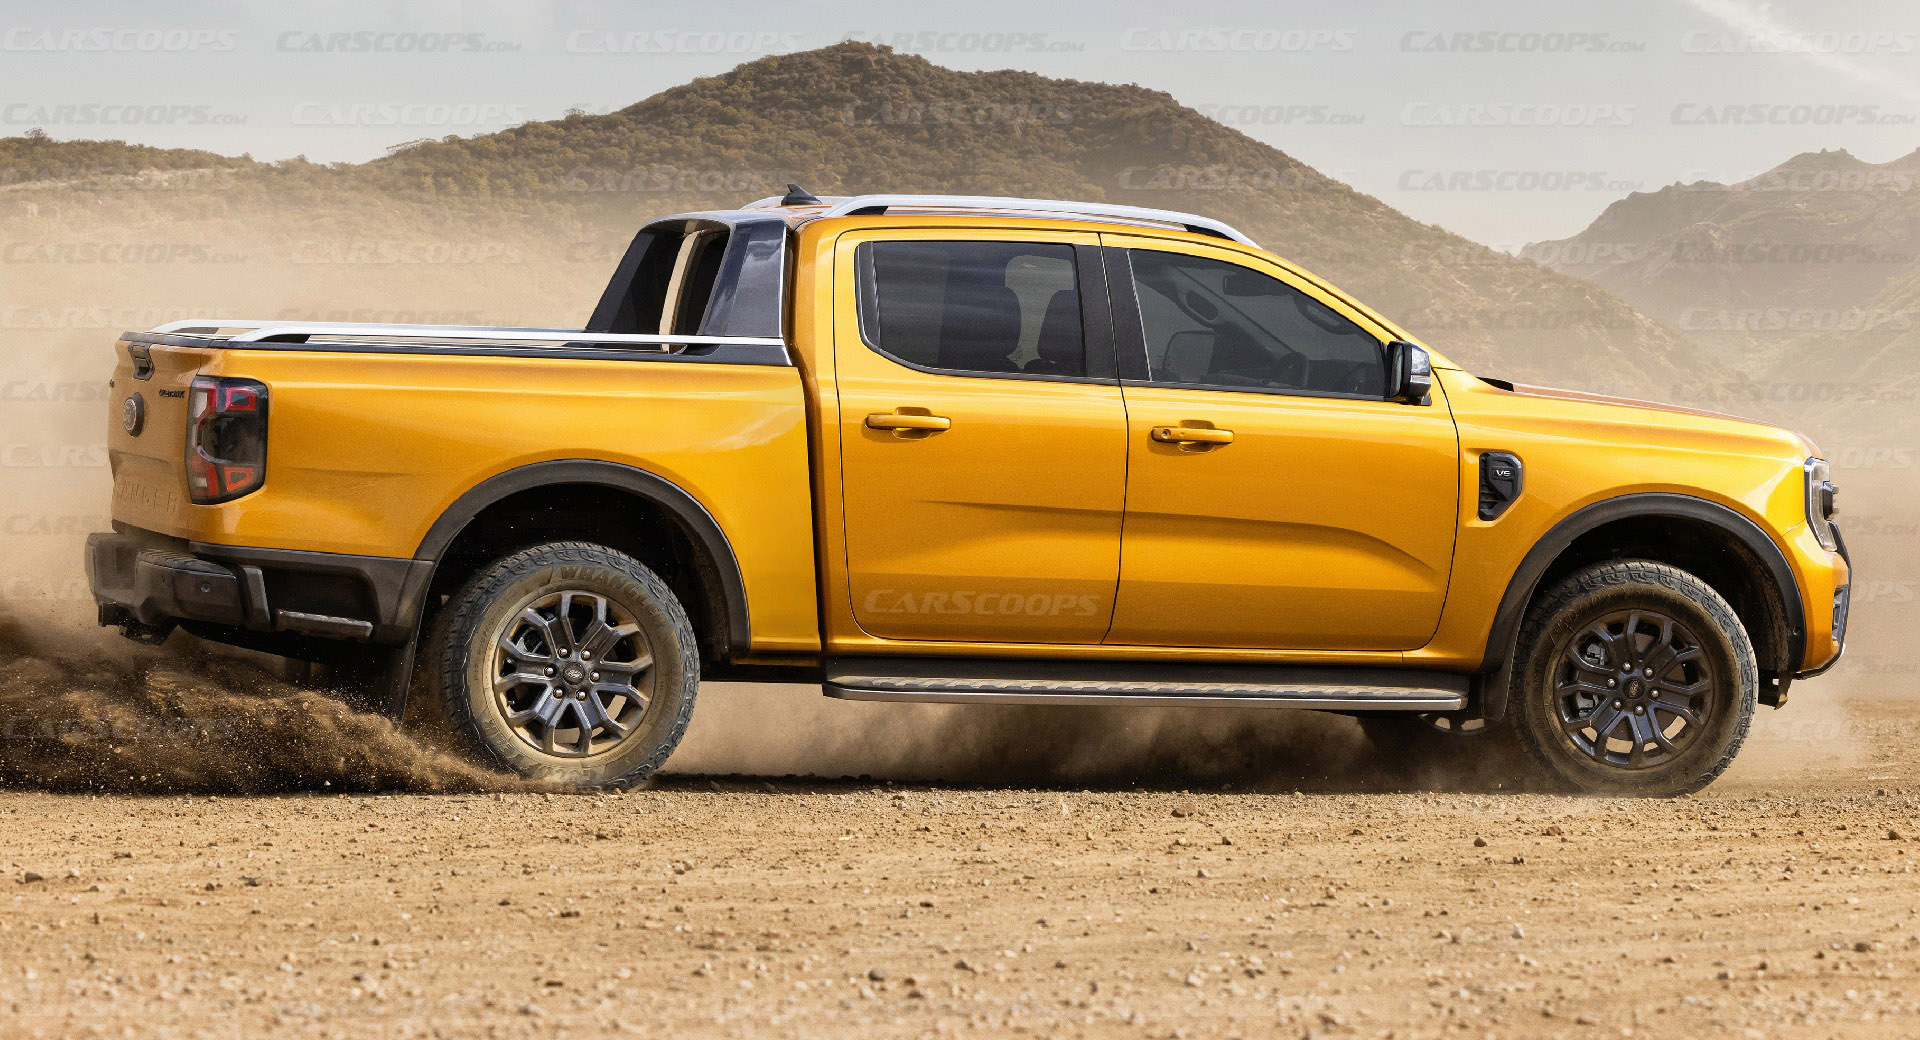 US-Spec Ford Ranger Reportedly Coming With A Longer Rear Bed Auto Recent